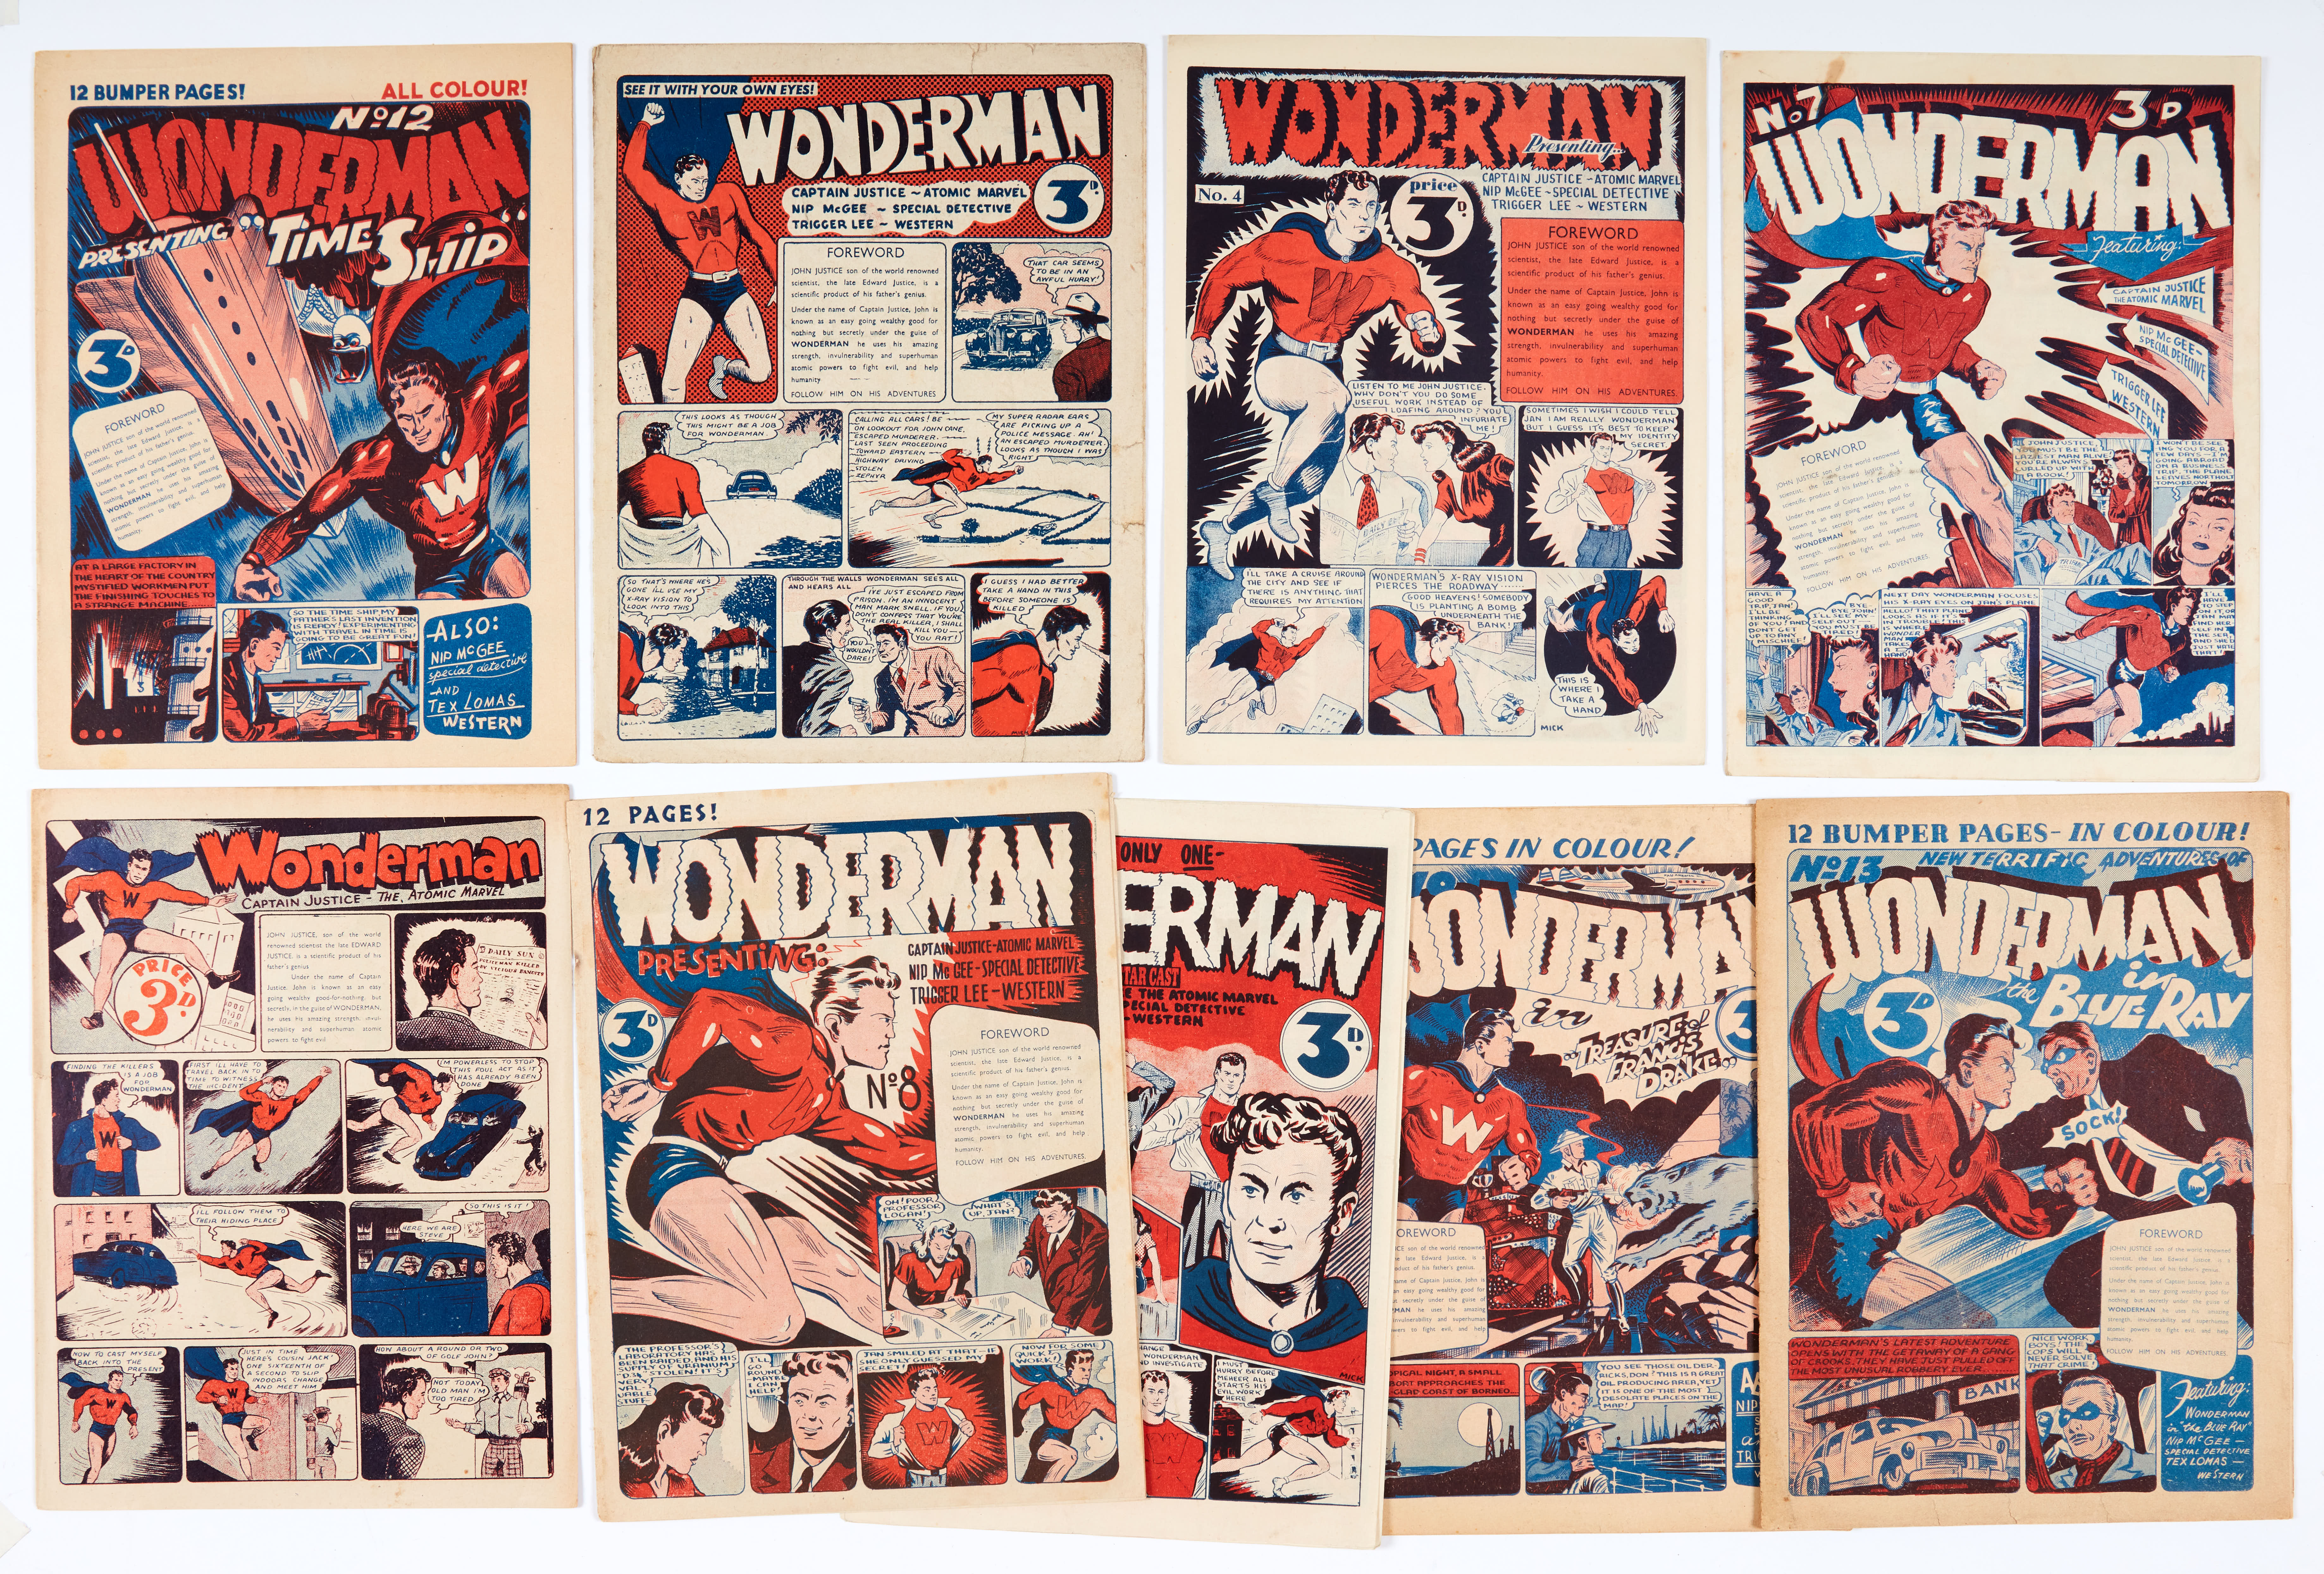 Wonderman (Paget Publ. 1948) 1 [fn], 2, 4, 5, 7, 8, 10, 12, 13. Starring Mick Anglo's first super-